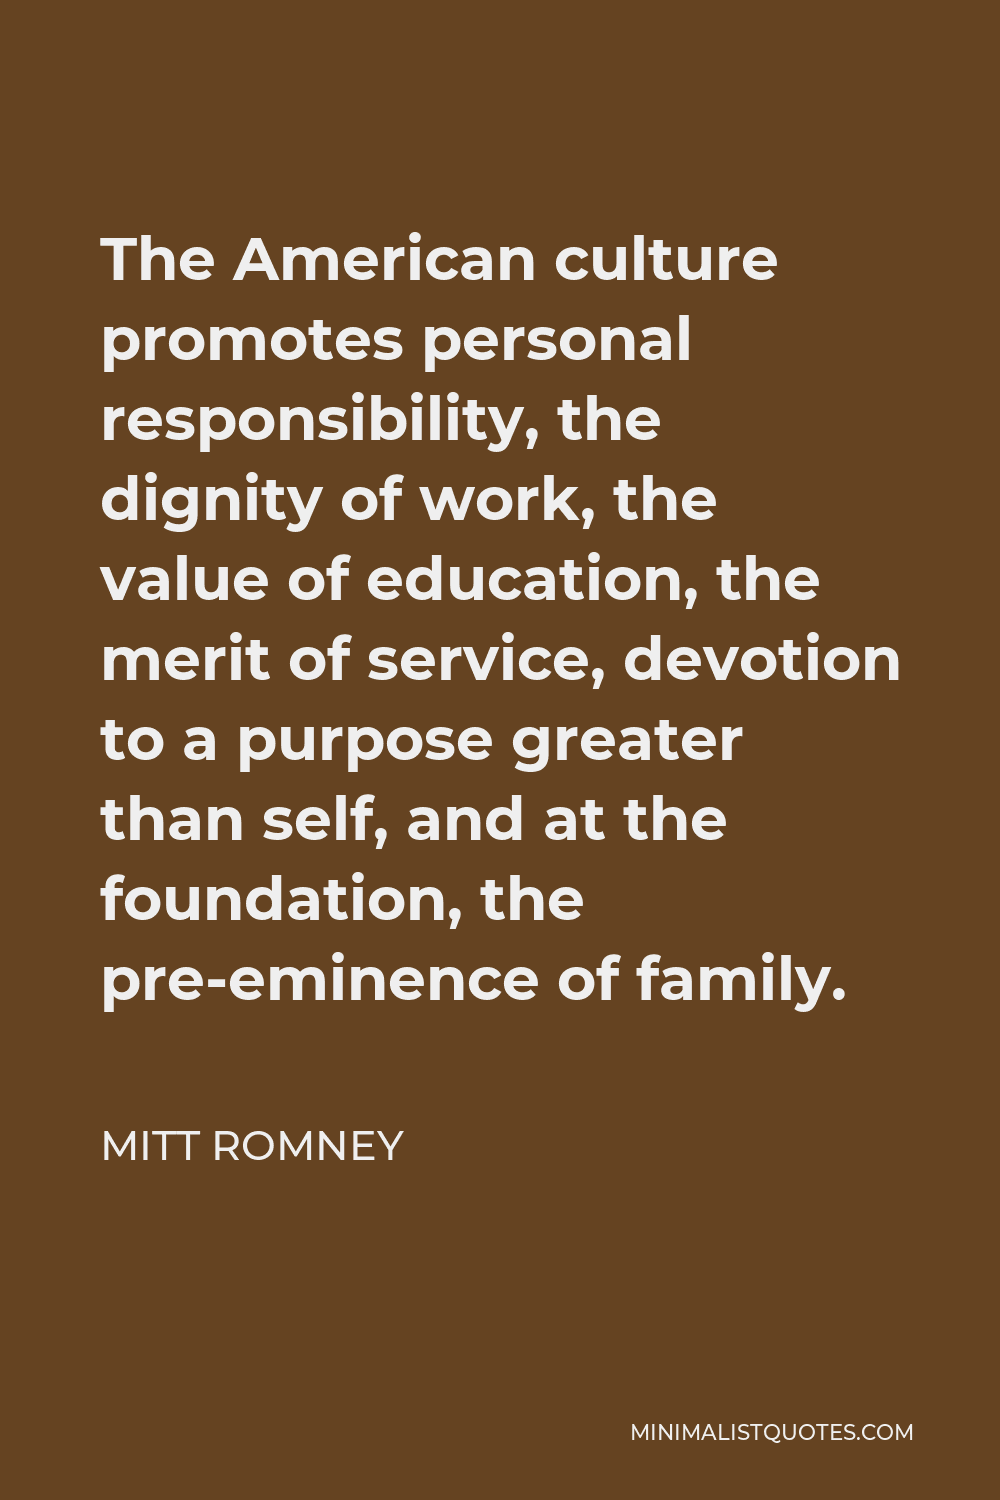 Mitt Romney Quote - The American culture promotes personal responsibility, the dignity of work, the value of education, the merit of service, devotion to a purpose greater than self, and at the foundation, the pre-eminence of family.